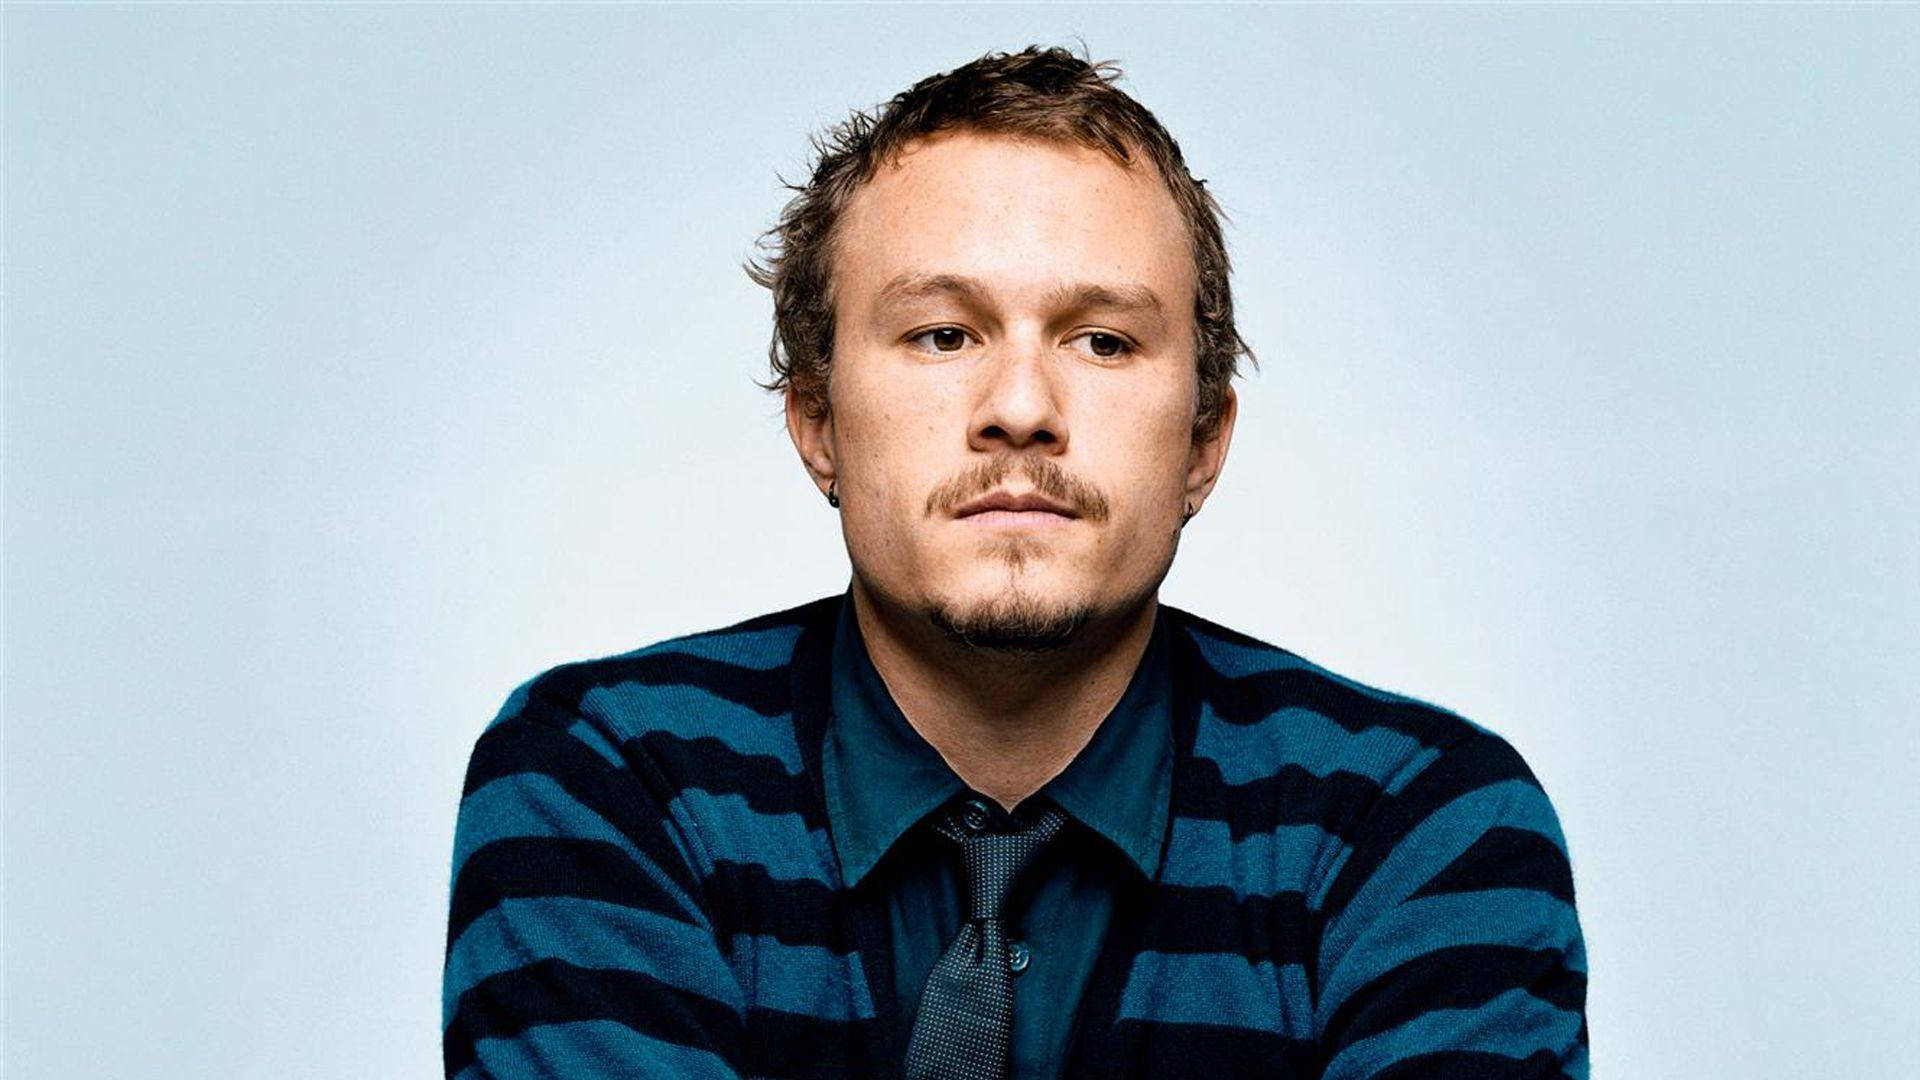 Top 999+ Heath Ledger Wallpapers Full HD, 4K✅Free to Use